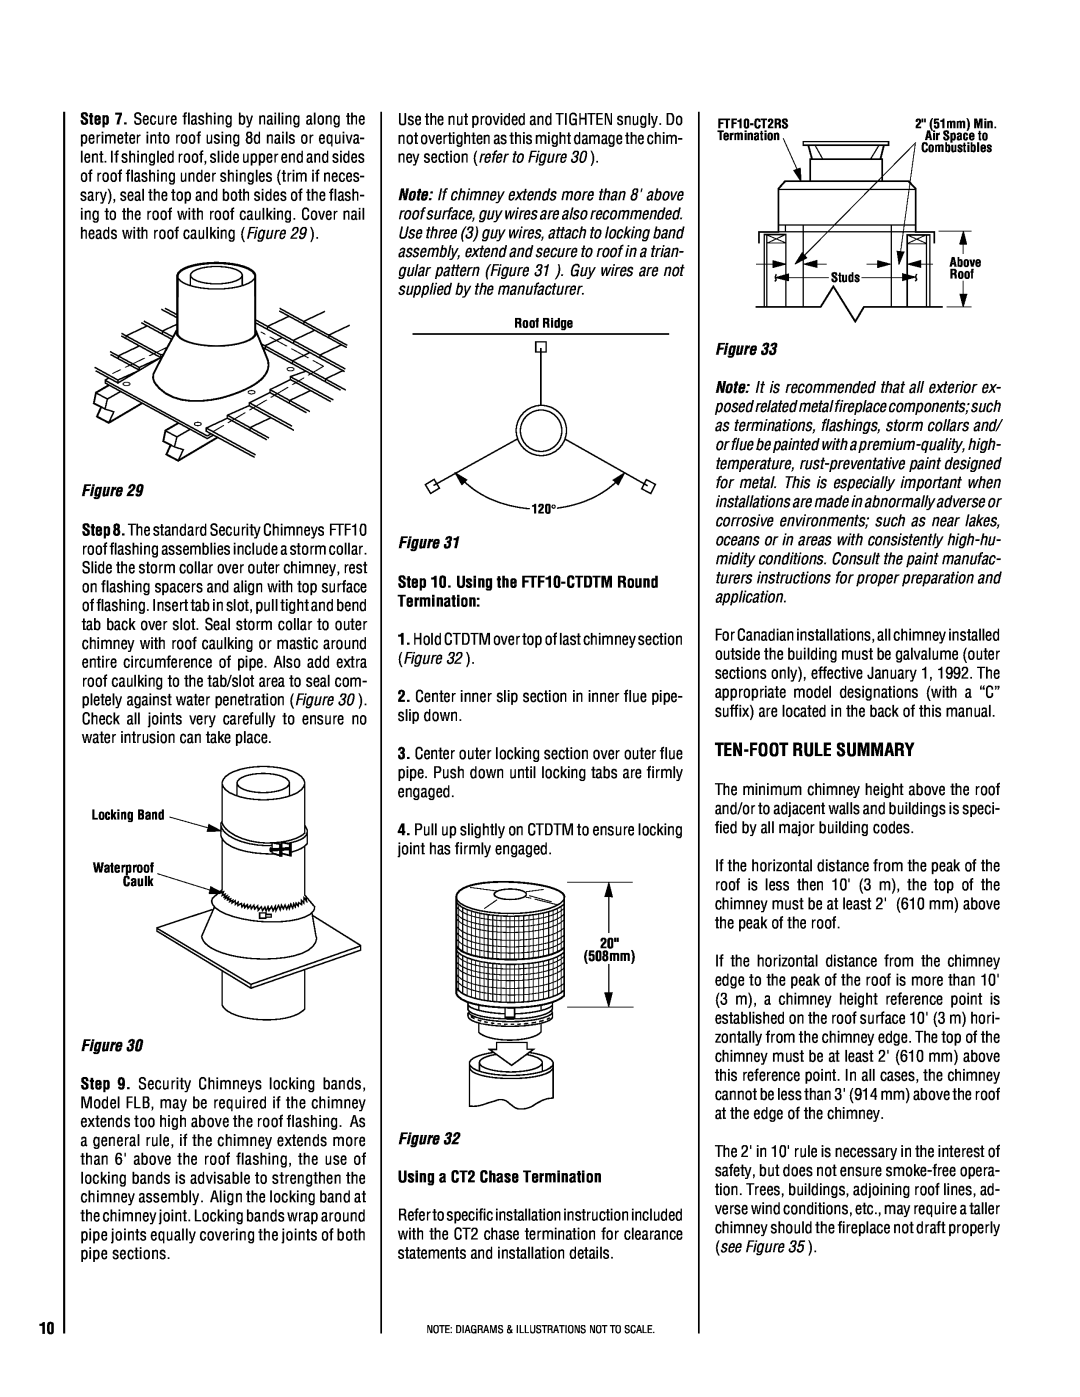 Lucent Technologies TM-4500 installation instructions Ten-Footrule Summary 